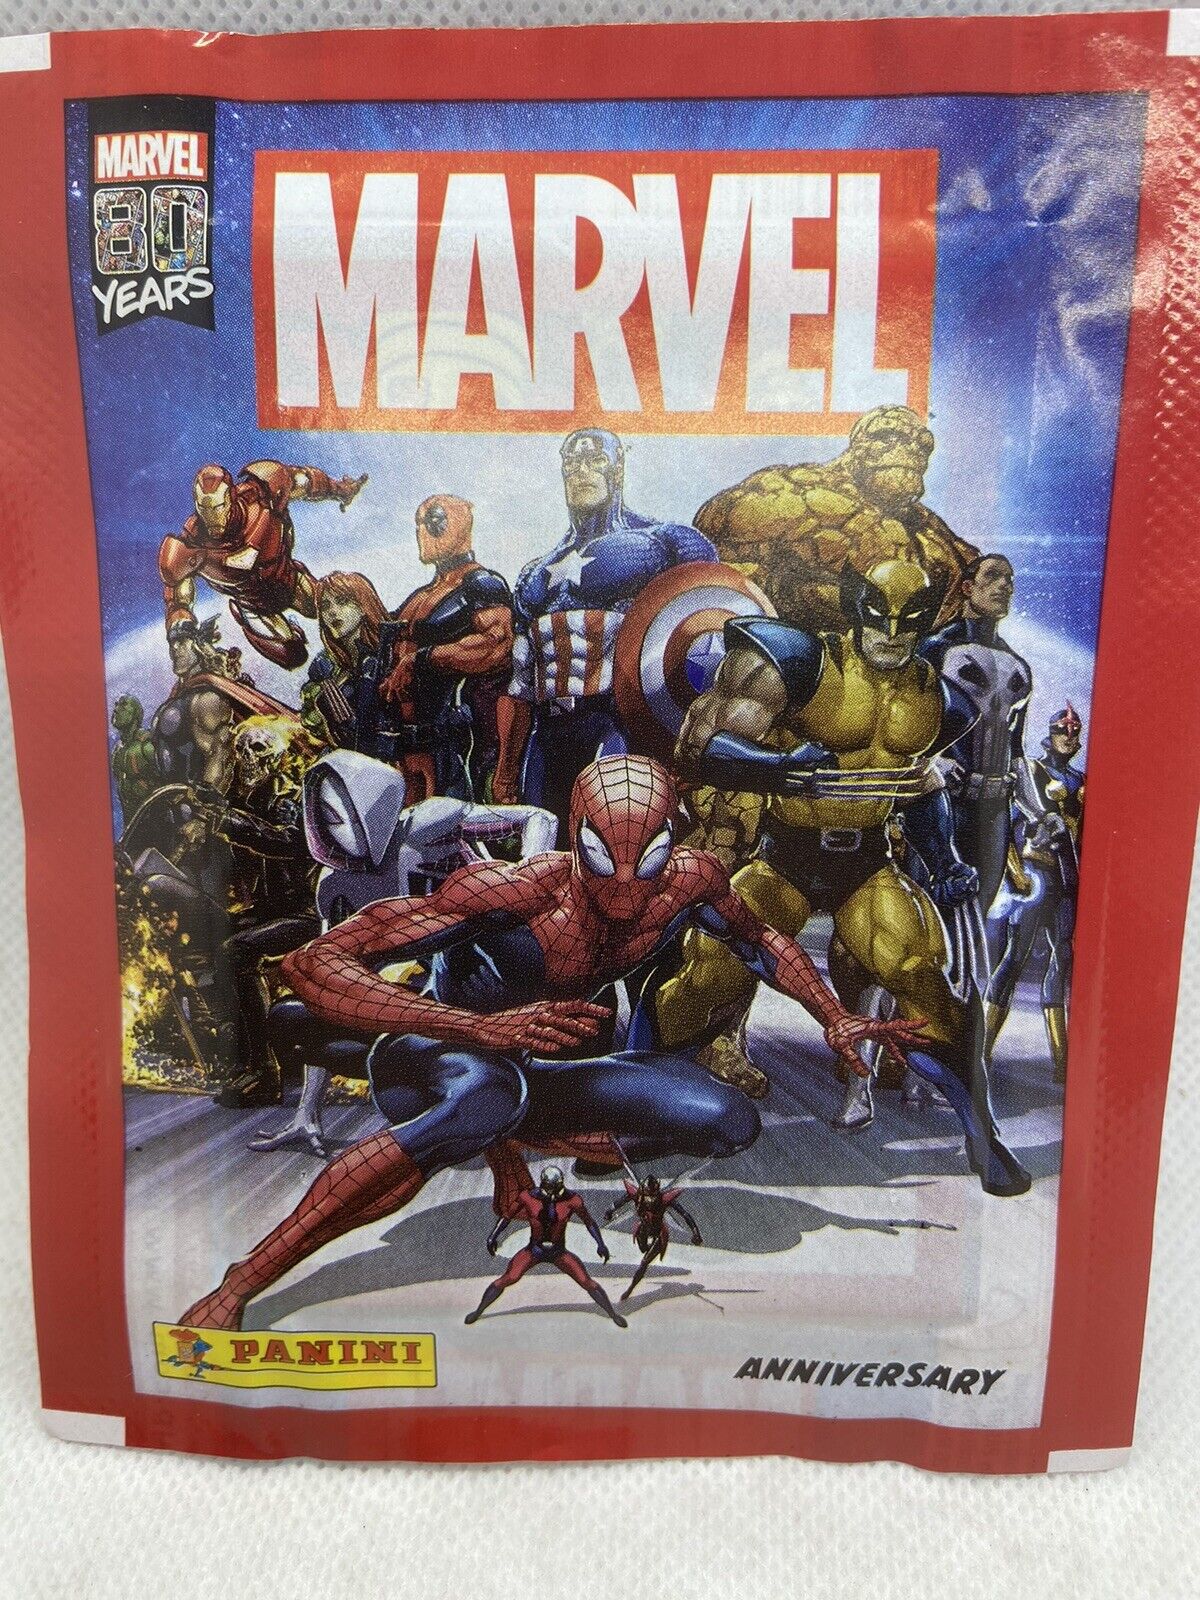 x20 Panini Marvel 80th Anniversary Sticker And Card Packs (100 Sticker 20 Cards